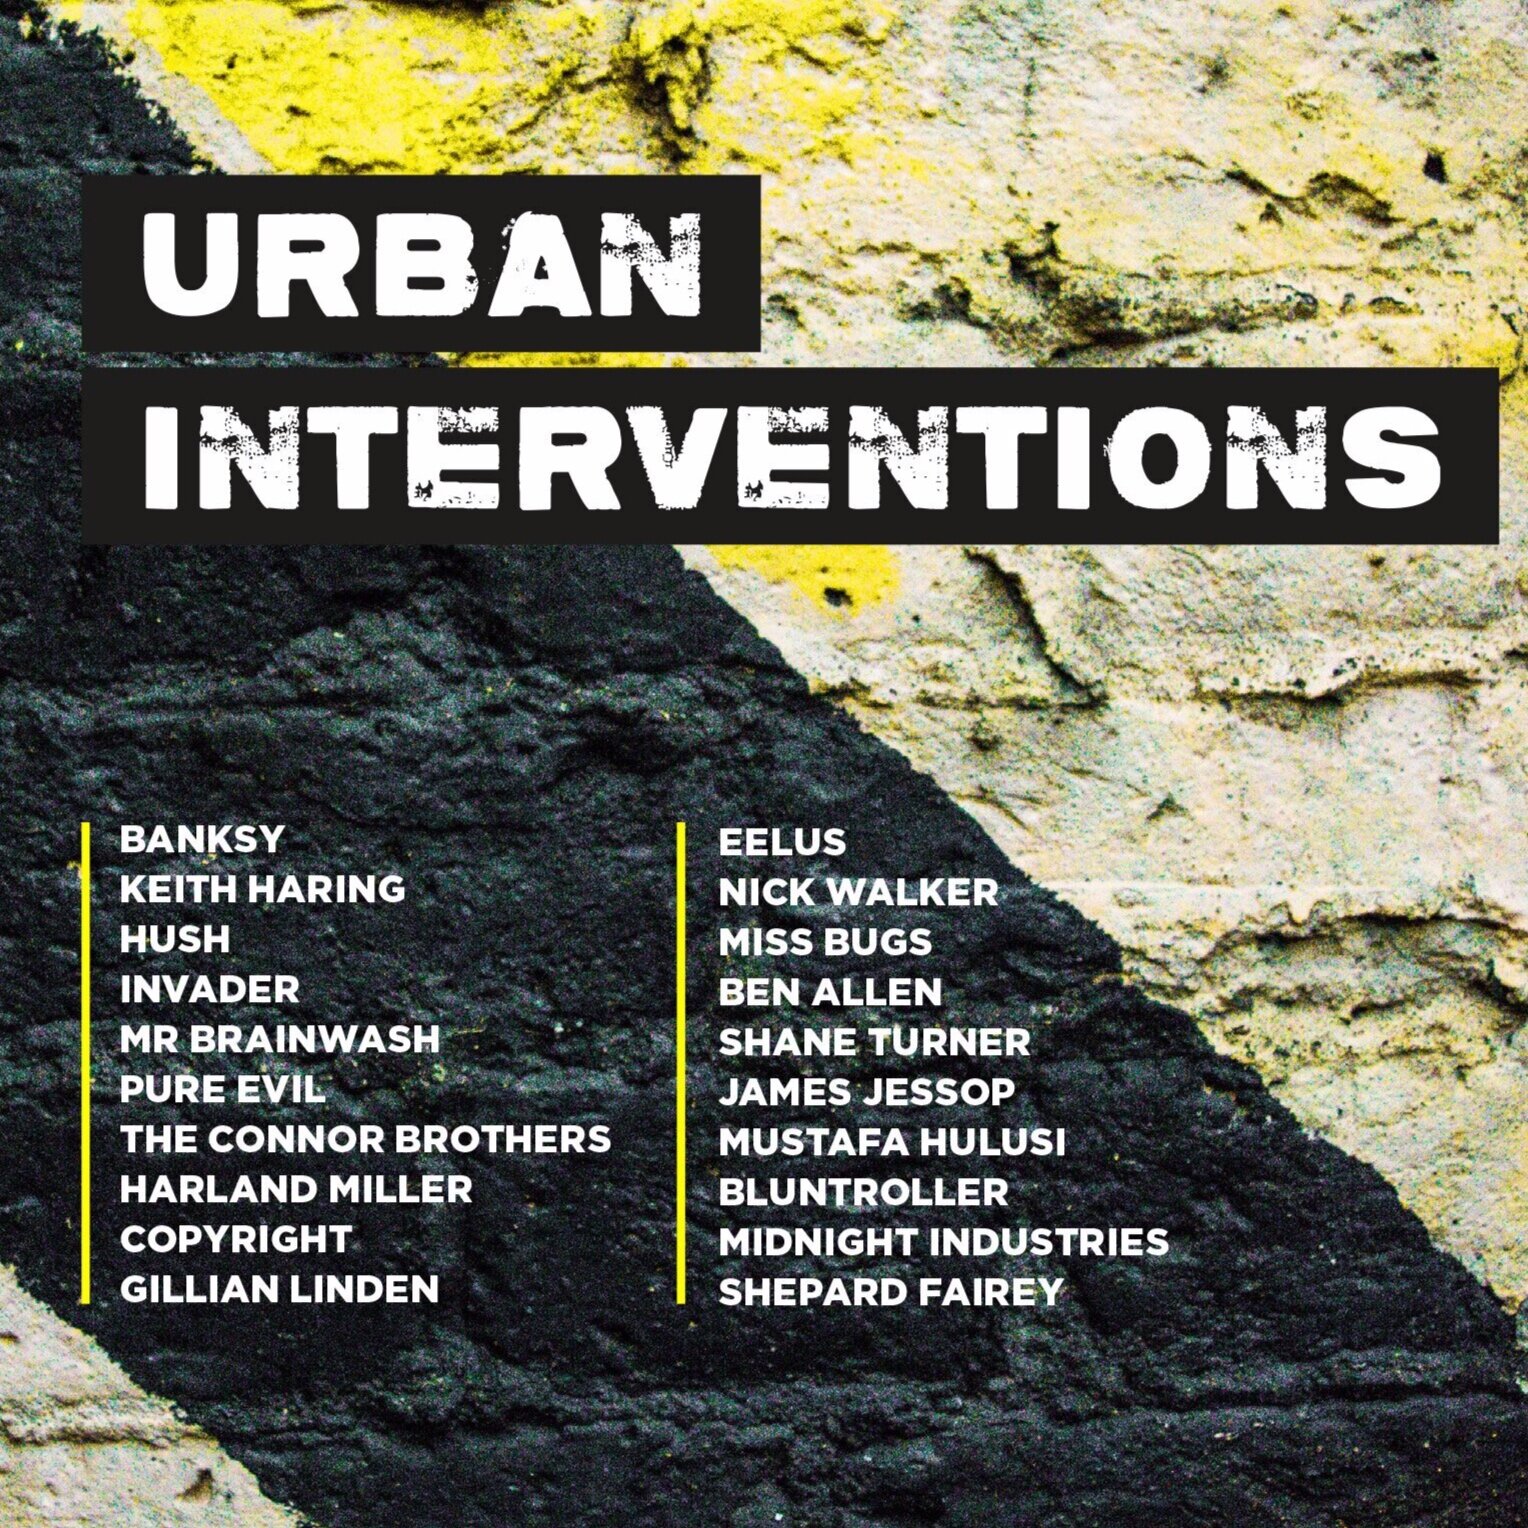 Urban+Interventions+Exhibition+Catalogue+cover.jpg